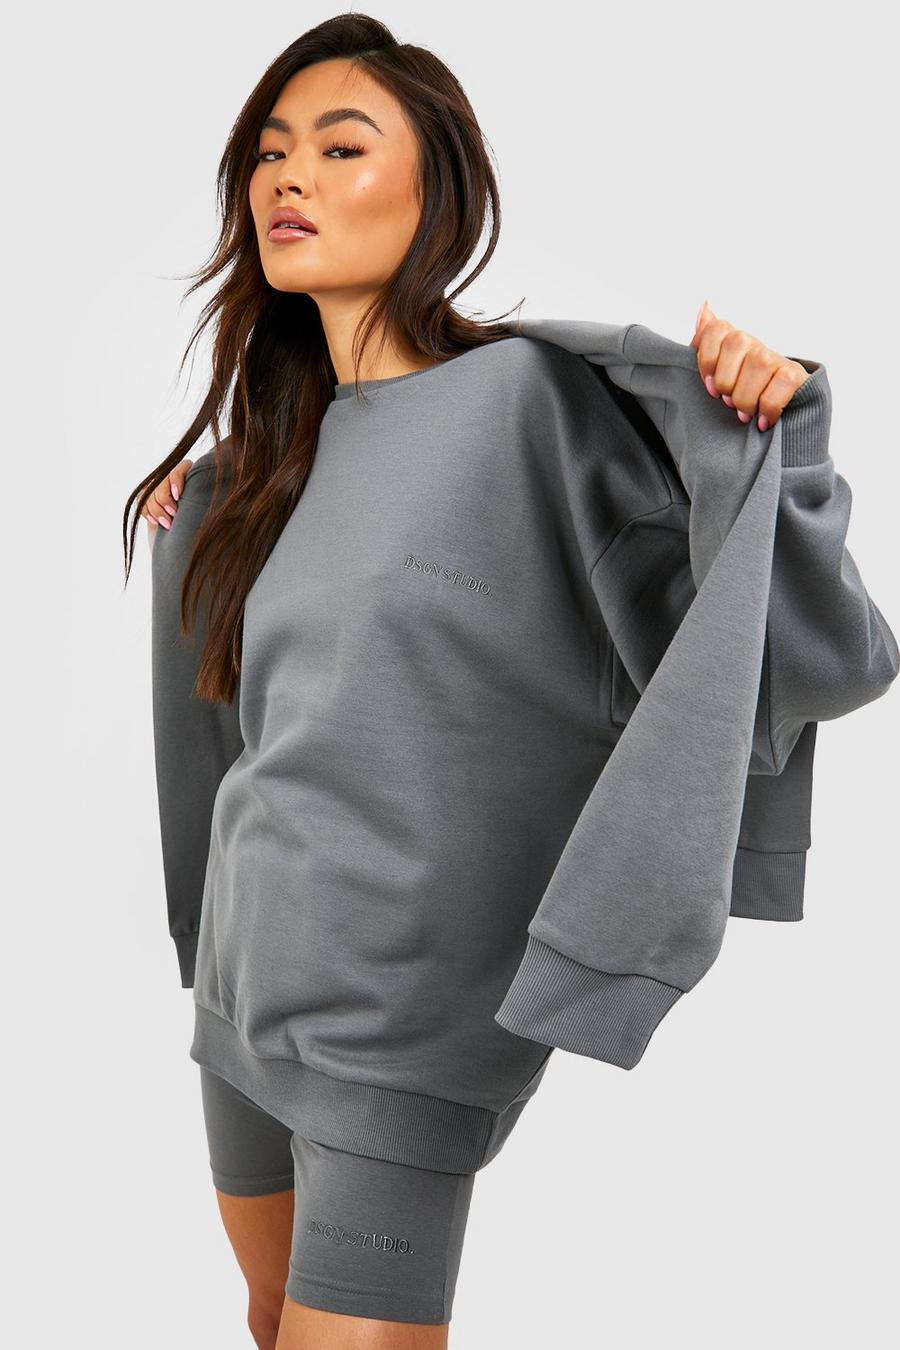 Charcoal Dsgn Studio Oversized Sweater And Cycling Short Set